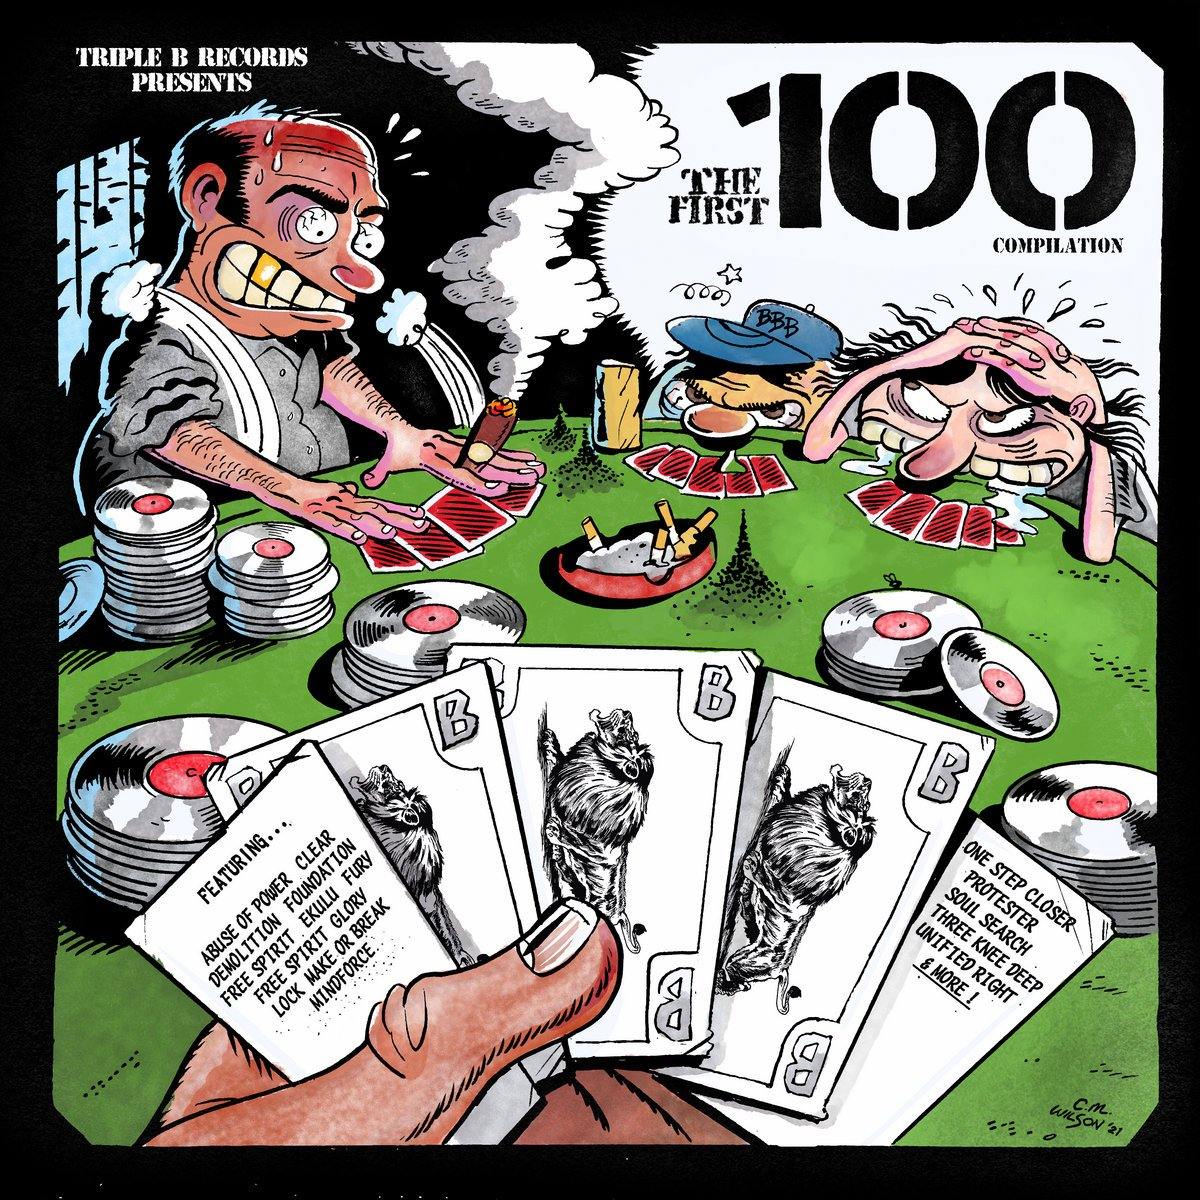 Buy – Various Artists "The First 100 Compilation" 2x12" – Band & Music Merch – Cold Cuts Merch